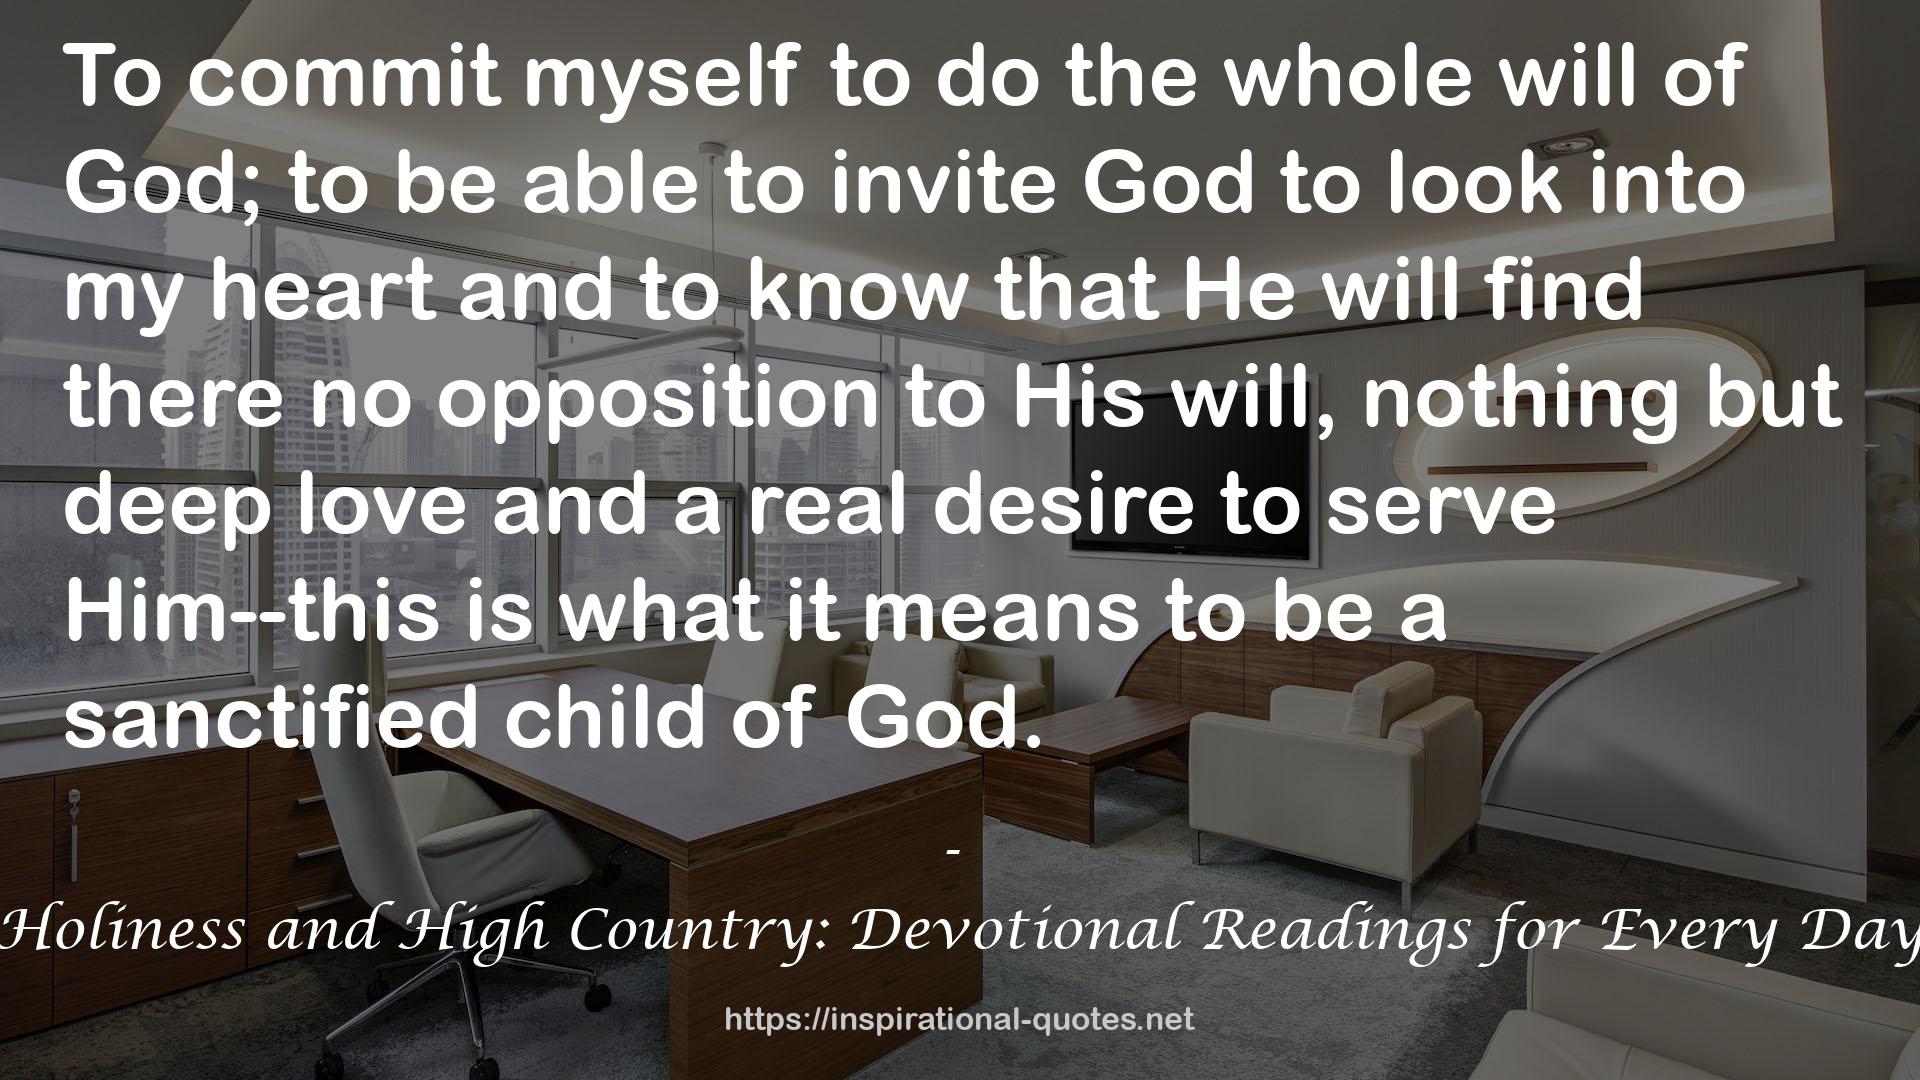 Holiness and High Country: Devotional Readings for Every Day QUOTES